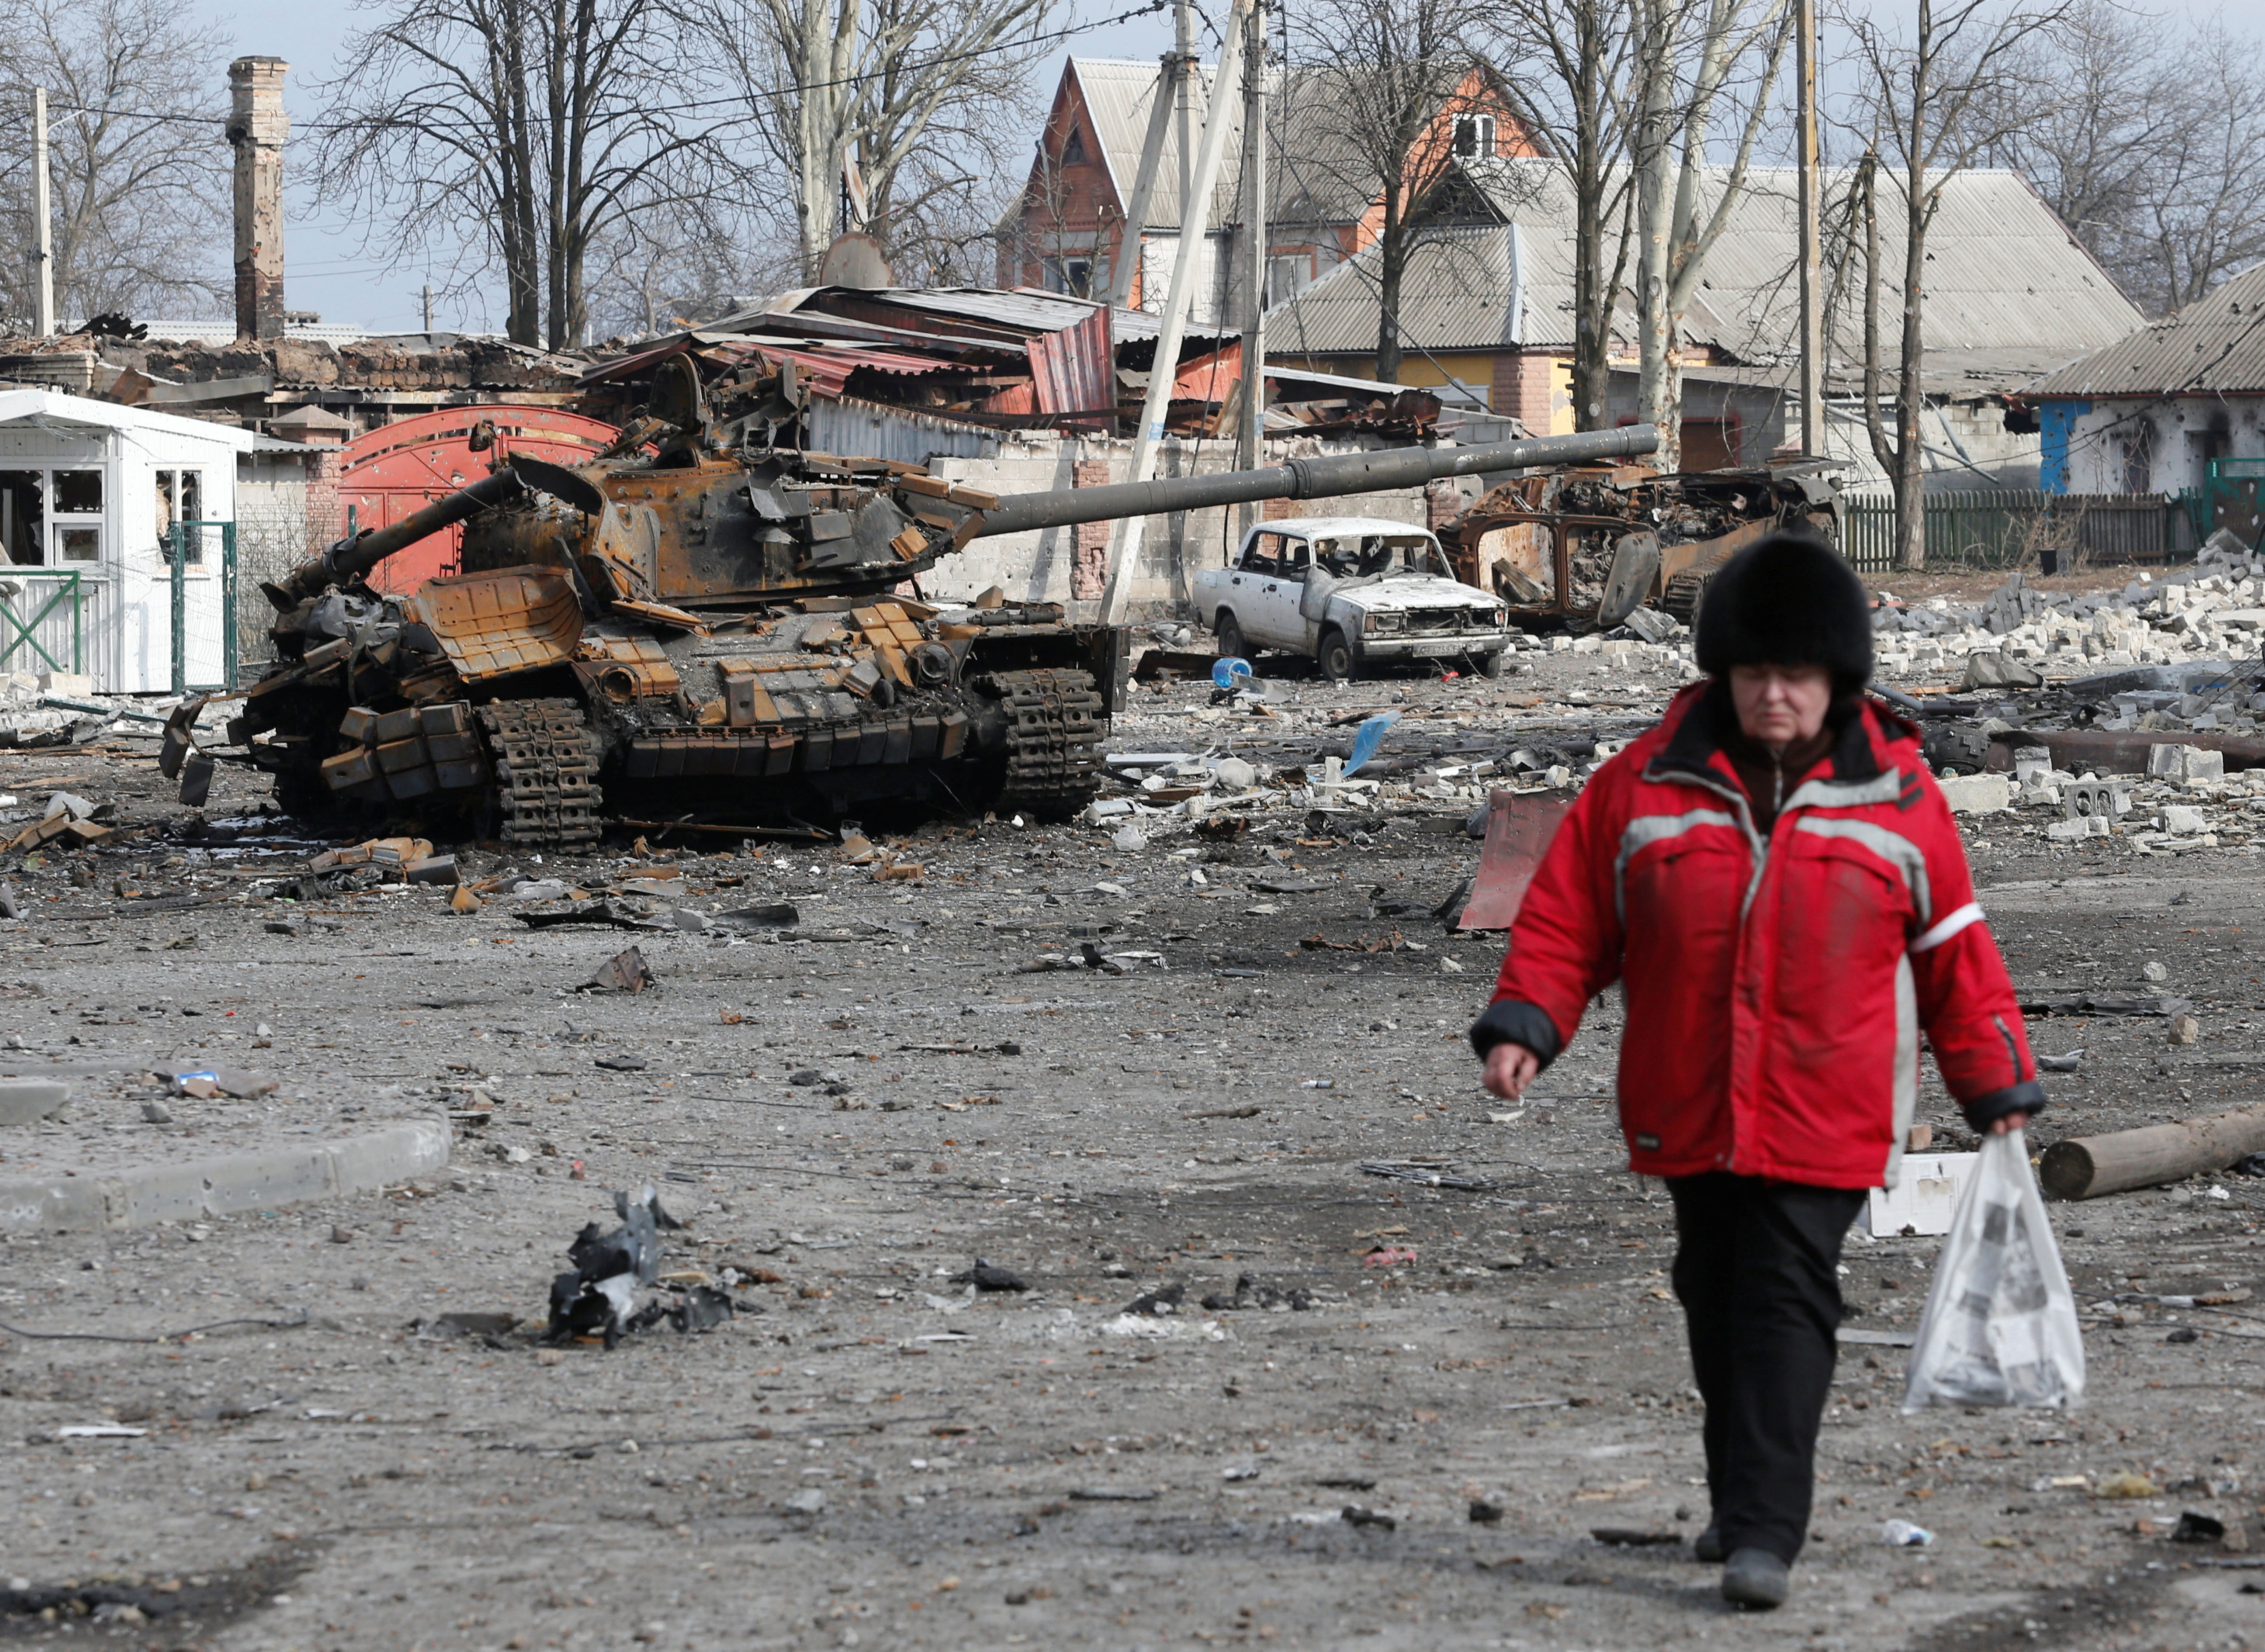 A woman walks past a destroyed tank in a damaged street in Volnovakha